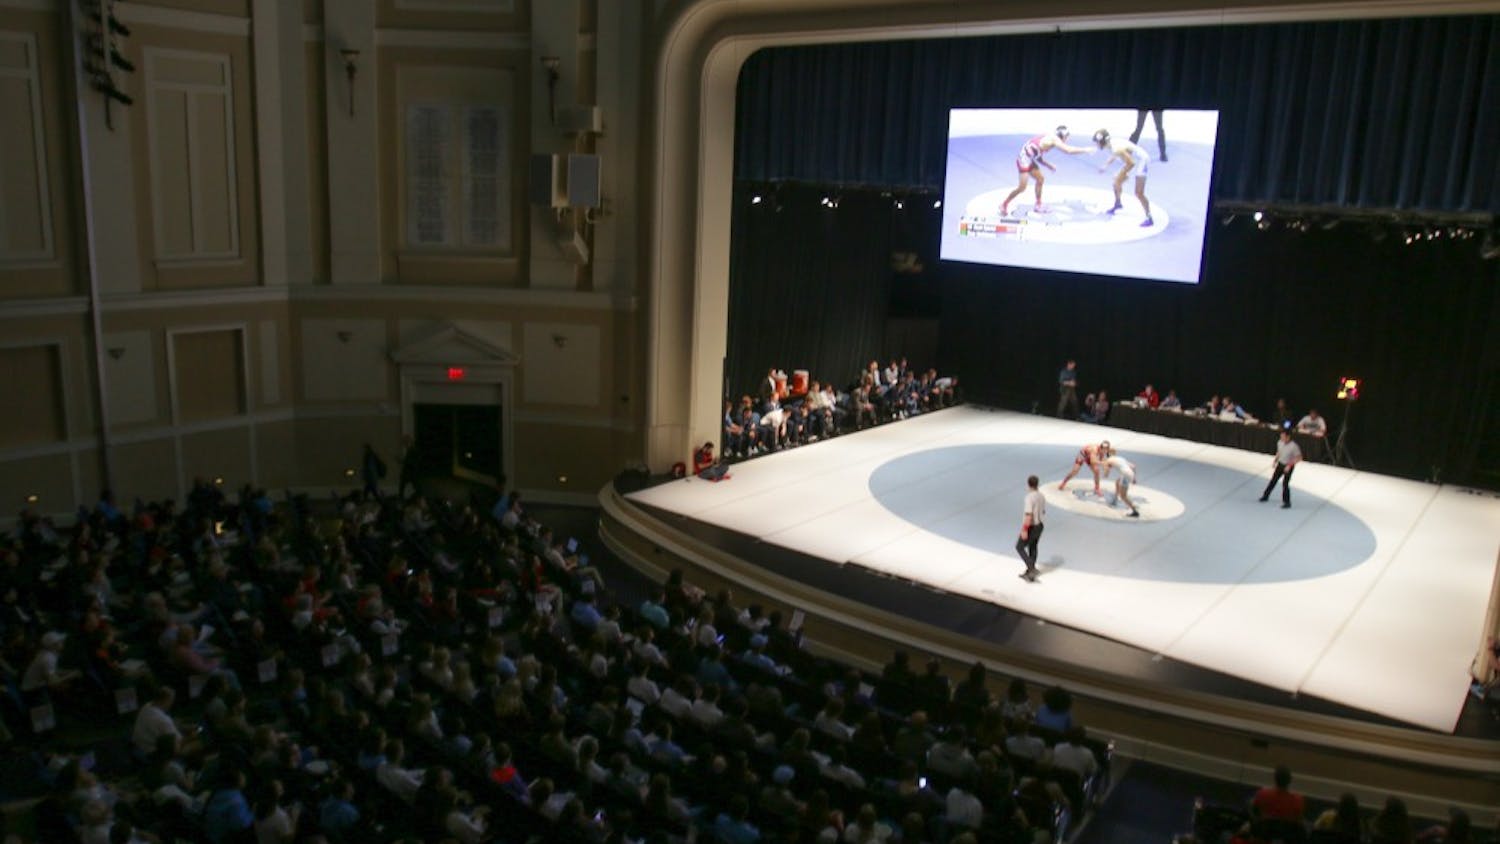 UNC wrestling squared off against NC State in the "Brawl at the Hall" on Monday night. The match took place on the stage in Memorial Hall.